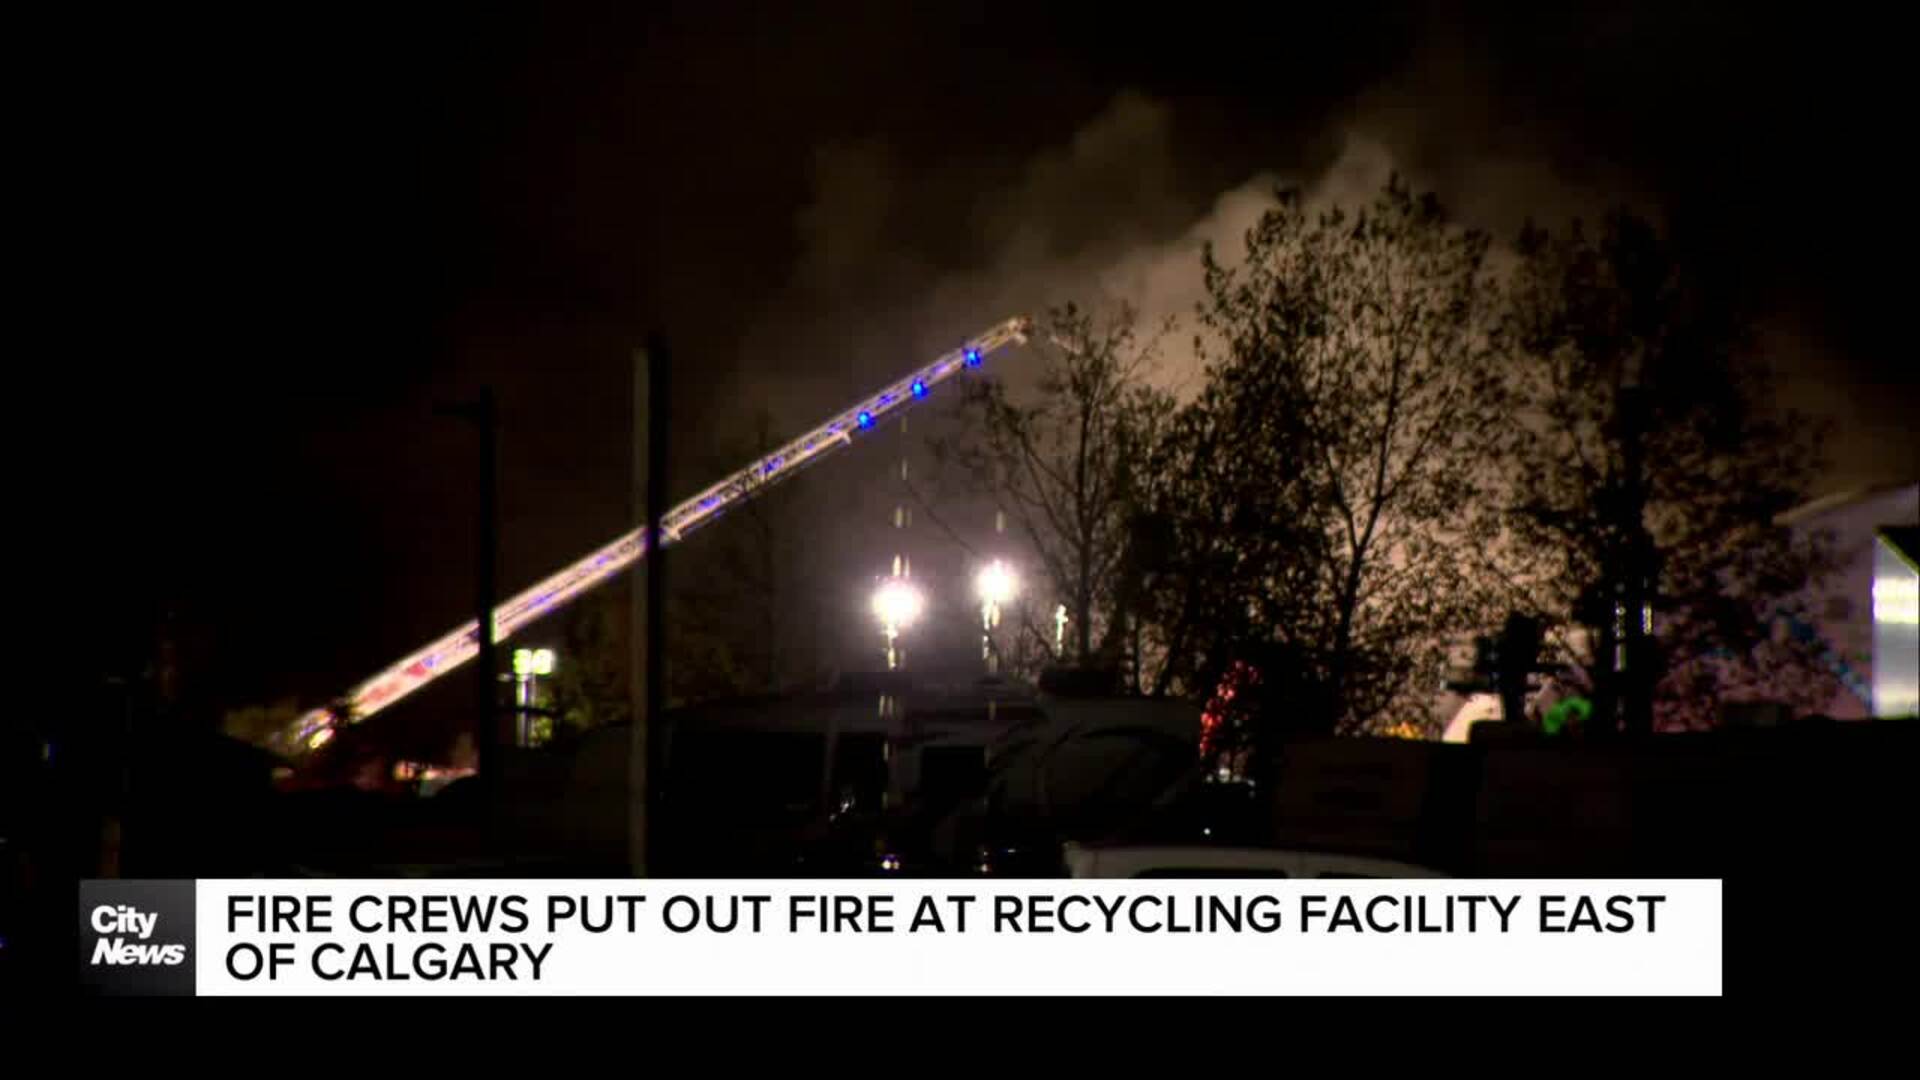 Fire crews put out fire at recycling facility east of Calgary